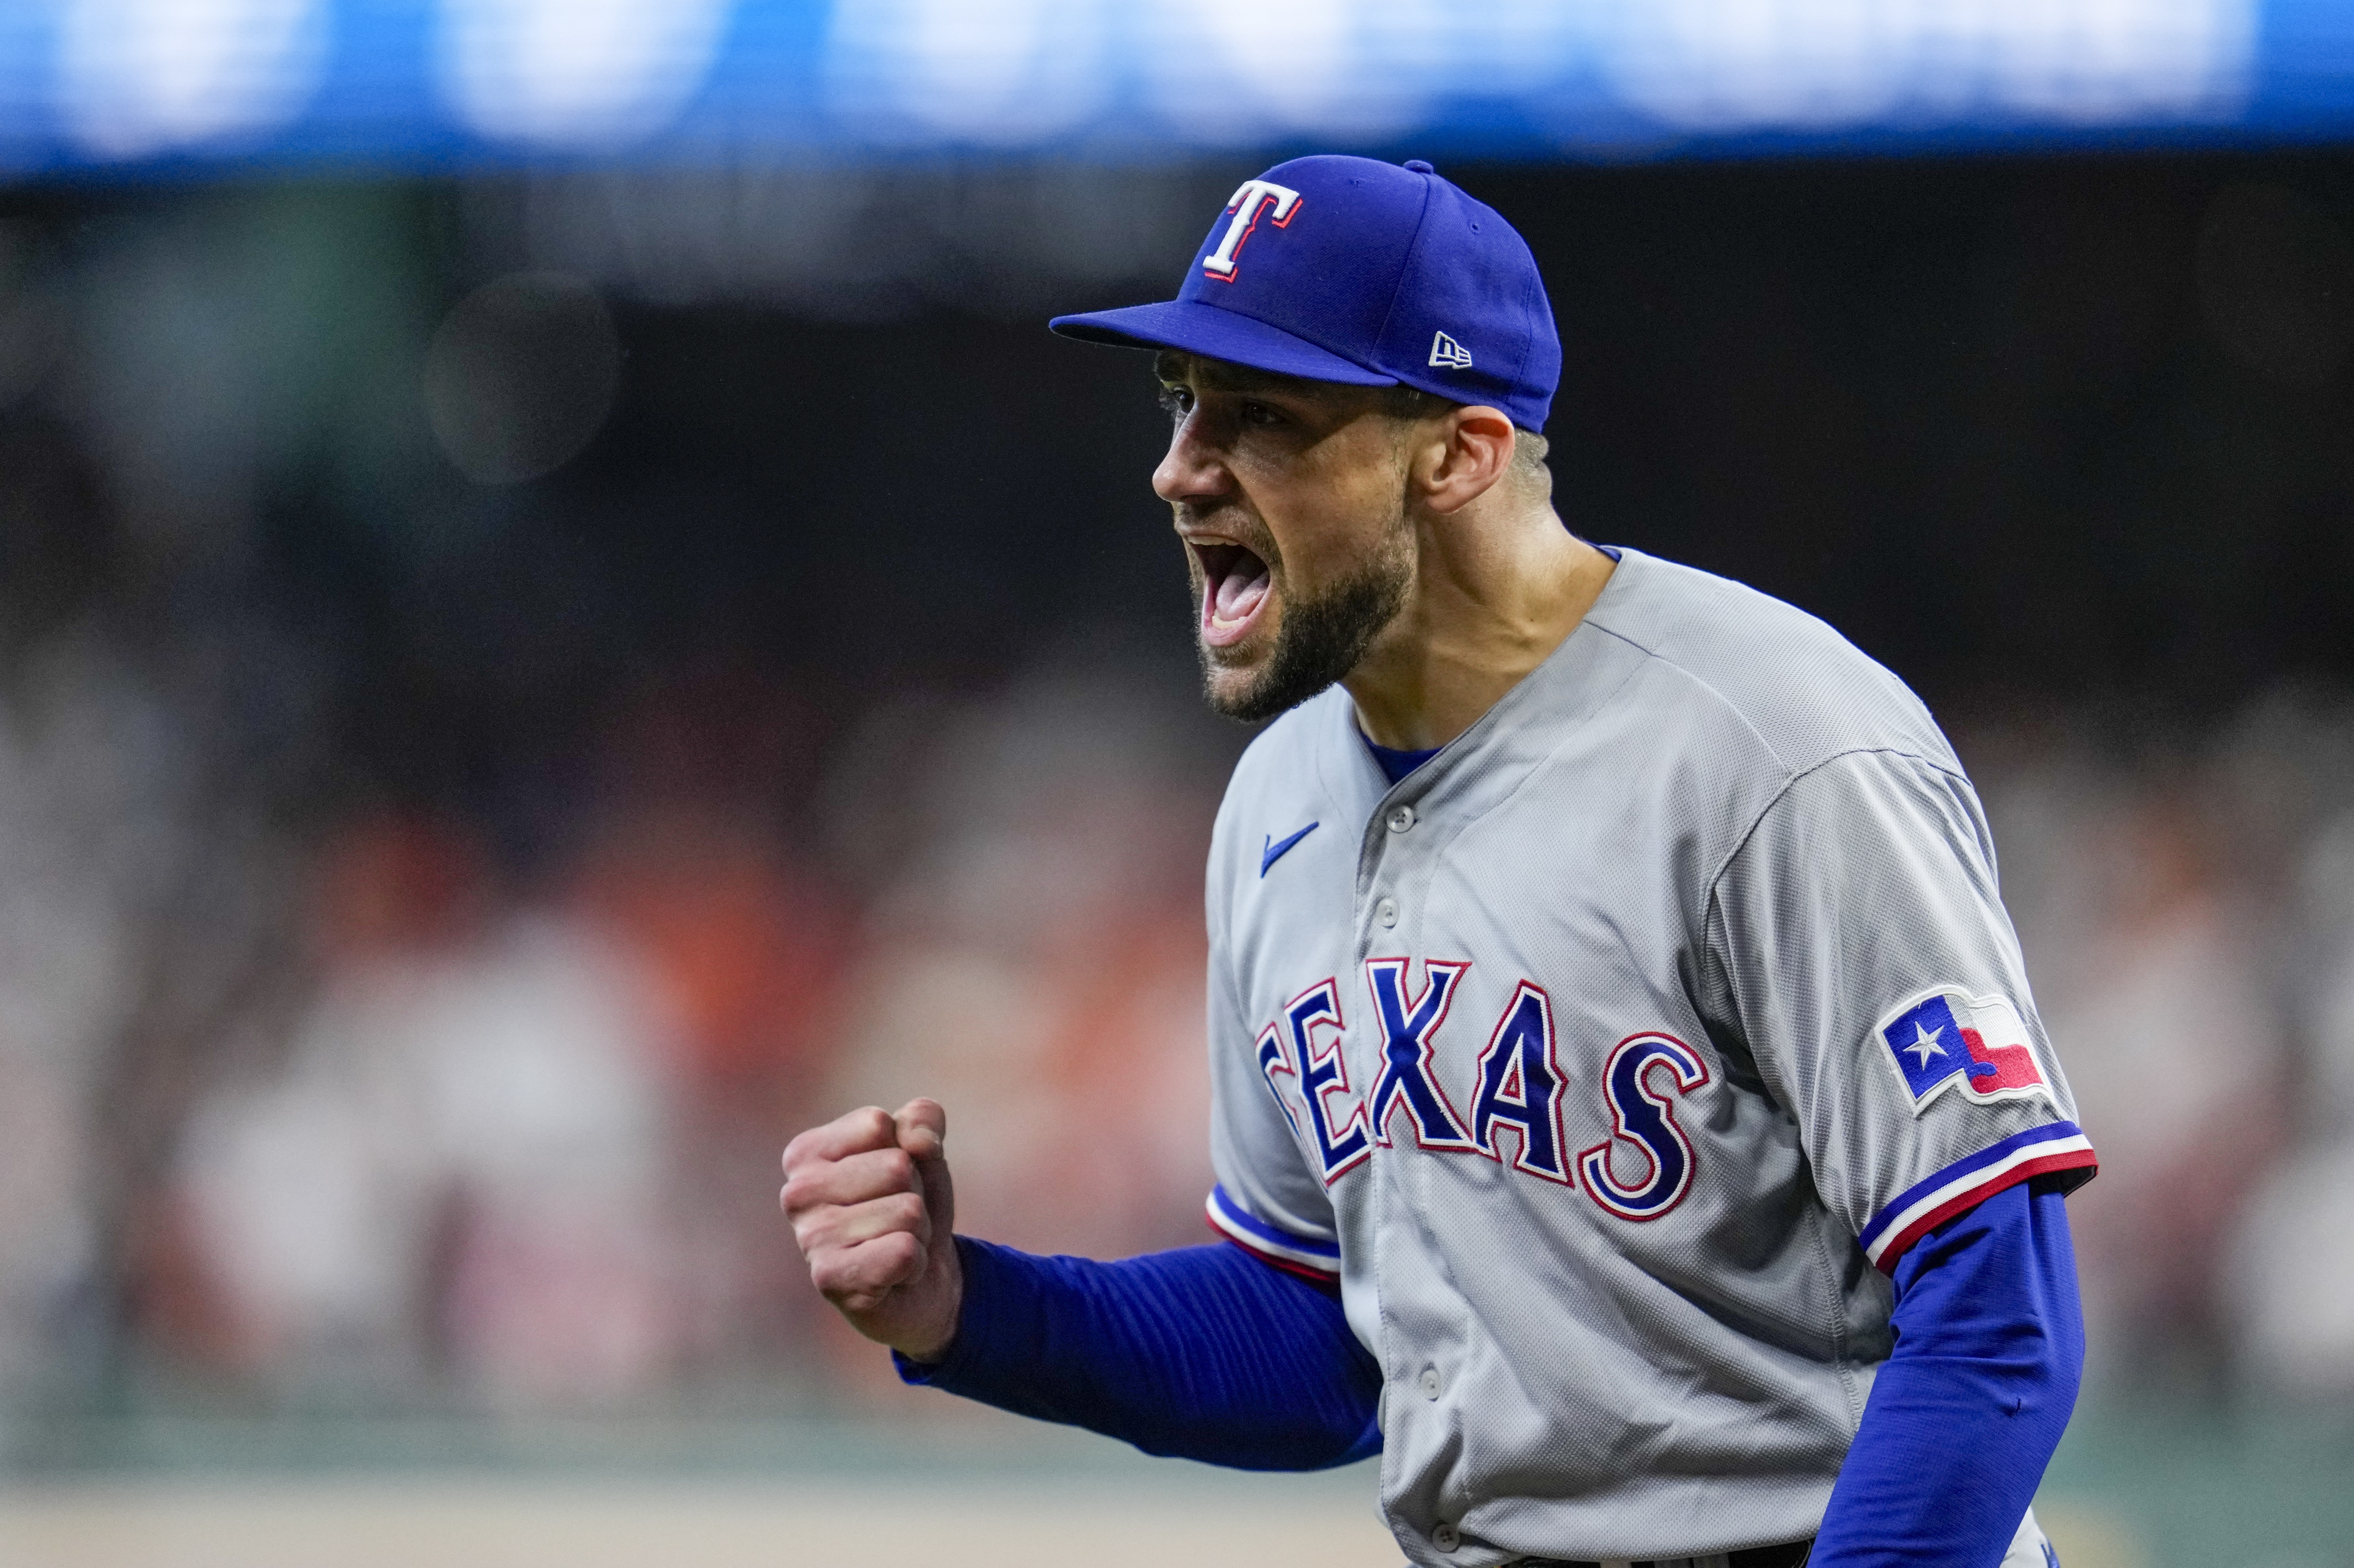 Astros vs. Rangers live stream: TV channel, how to watch Game 4